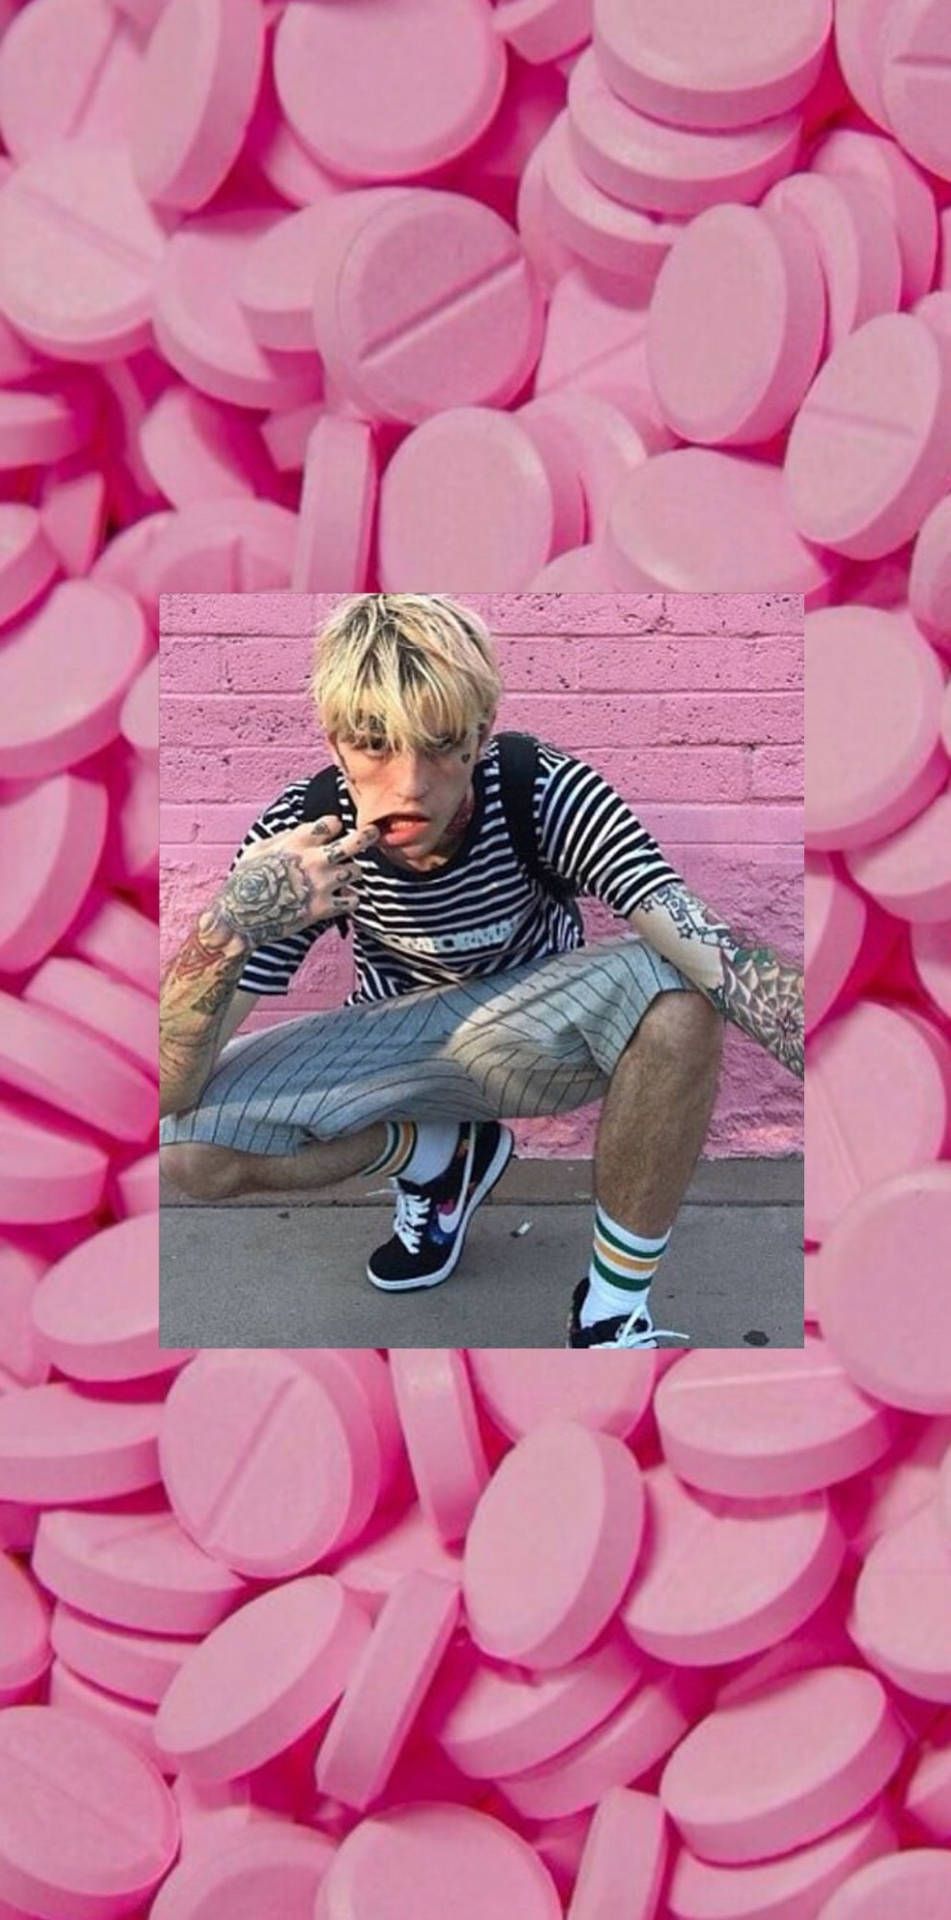 Download Pink Aesthetic Lil Peep With Pills Wallpaper